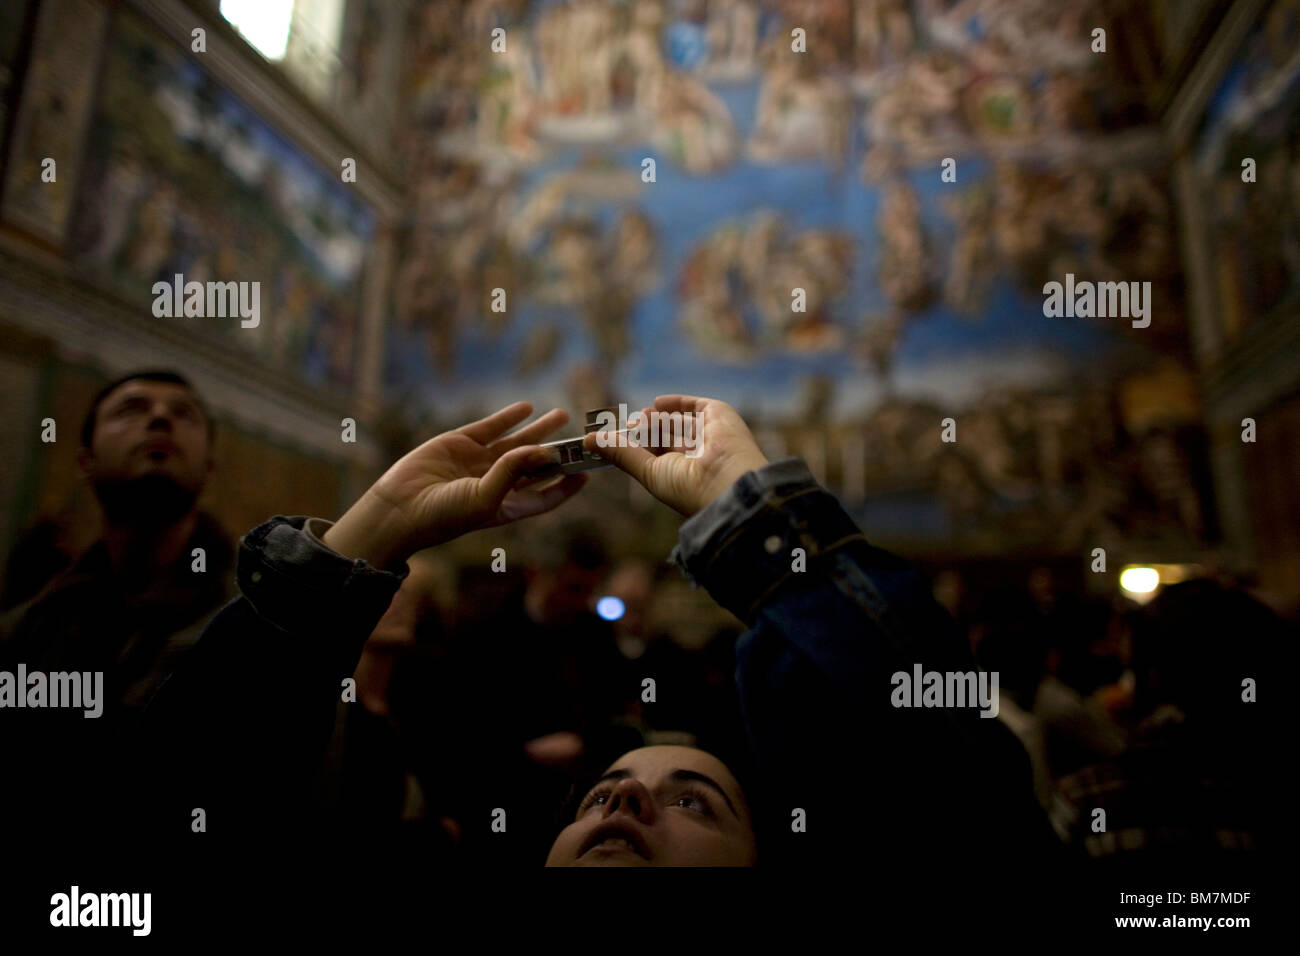 A tourist photographs the ceiling of the Sistine Chapel by Michelangelo in the Vatican Museum, Rome, Italy. Stock Photo